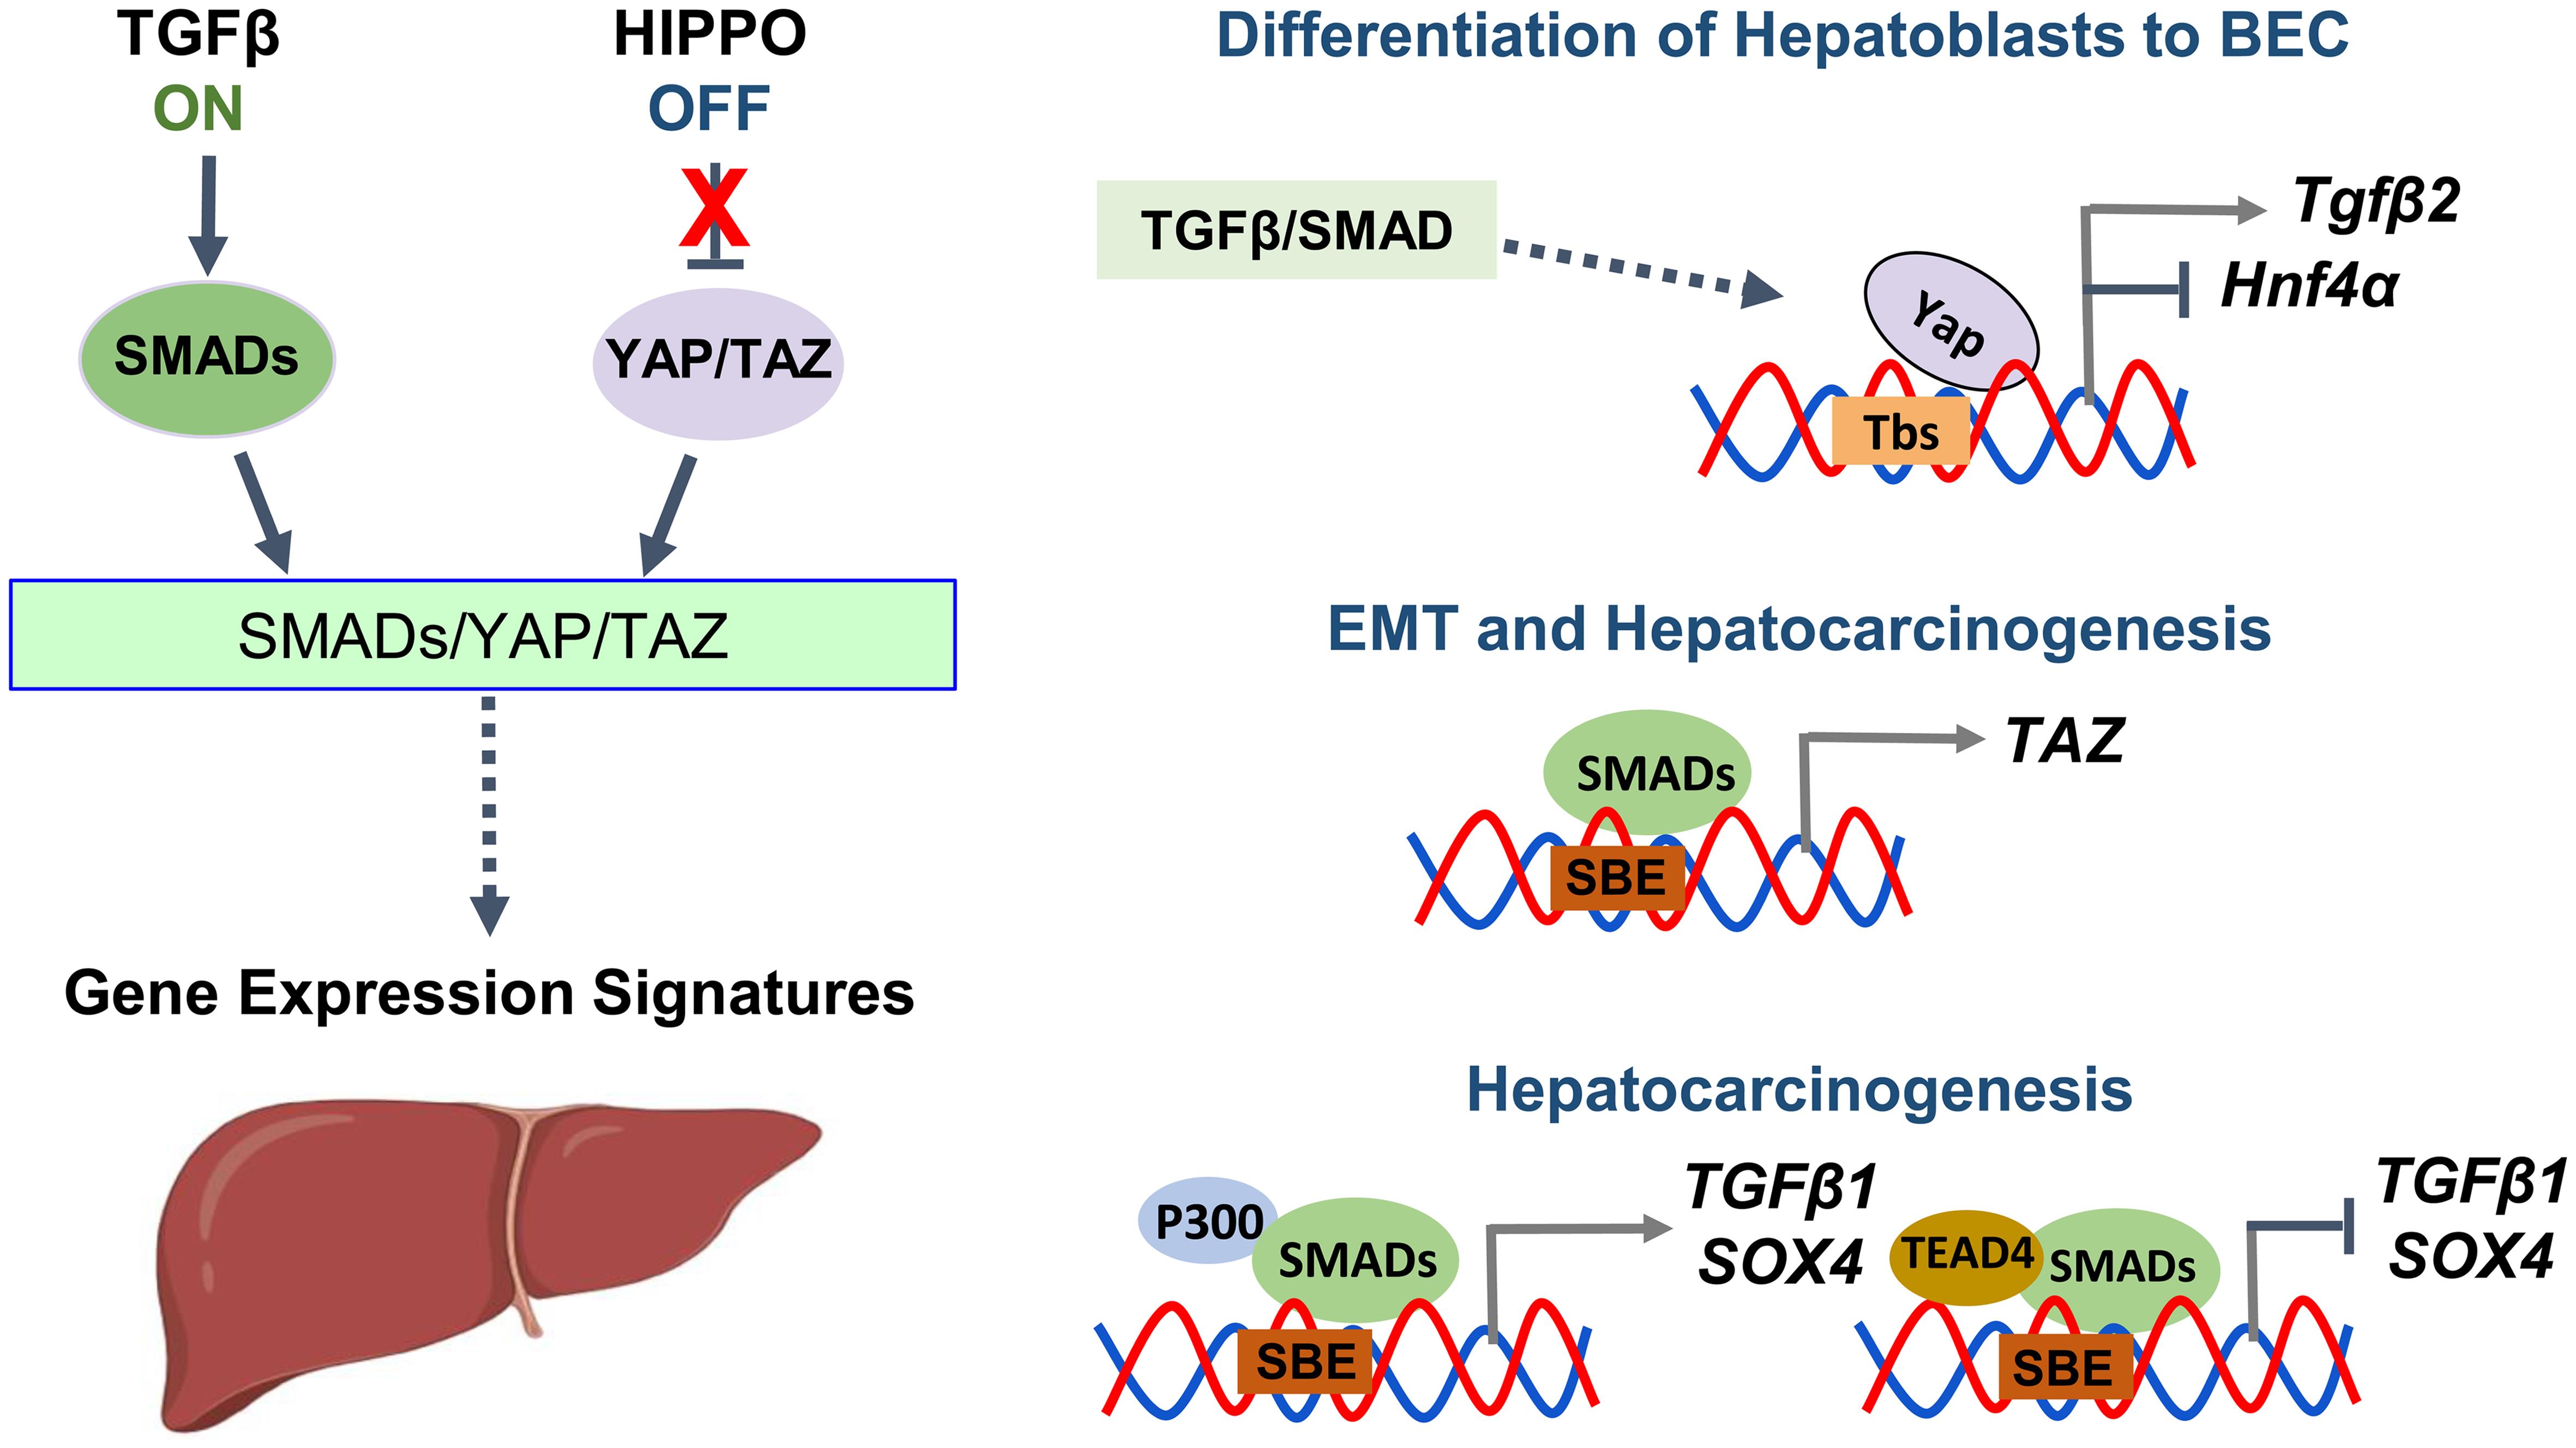 Gene expression is regulated by the HIPPO/YAP/TAZ and TGF-β/SMAD crosstalk in the liver.